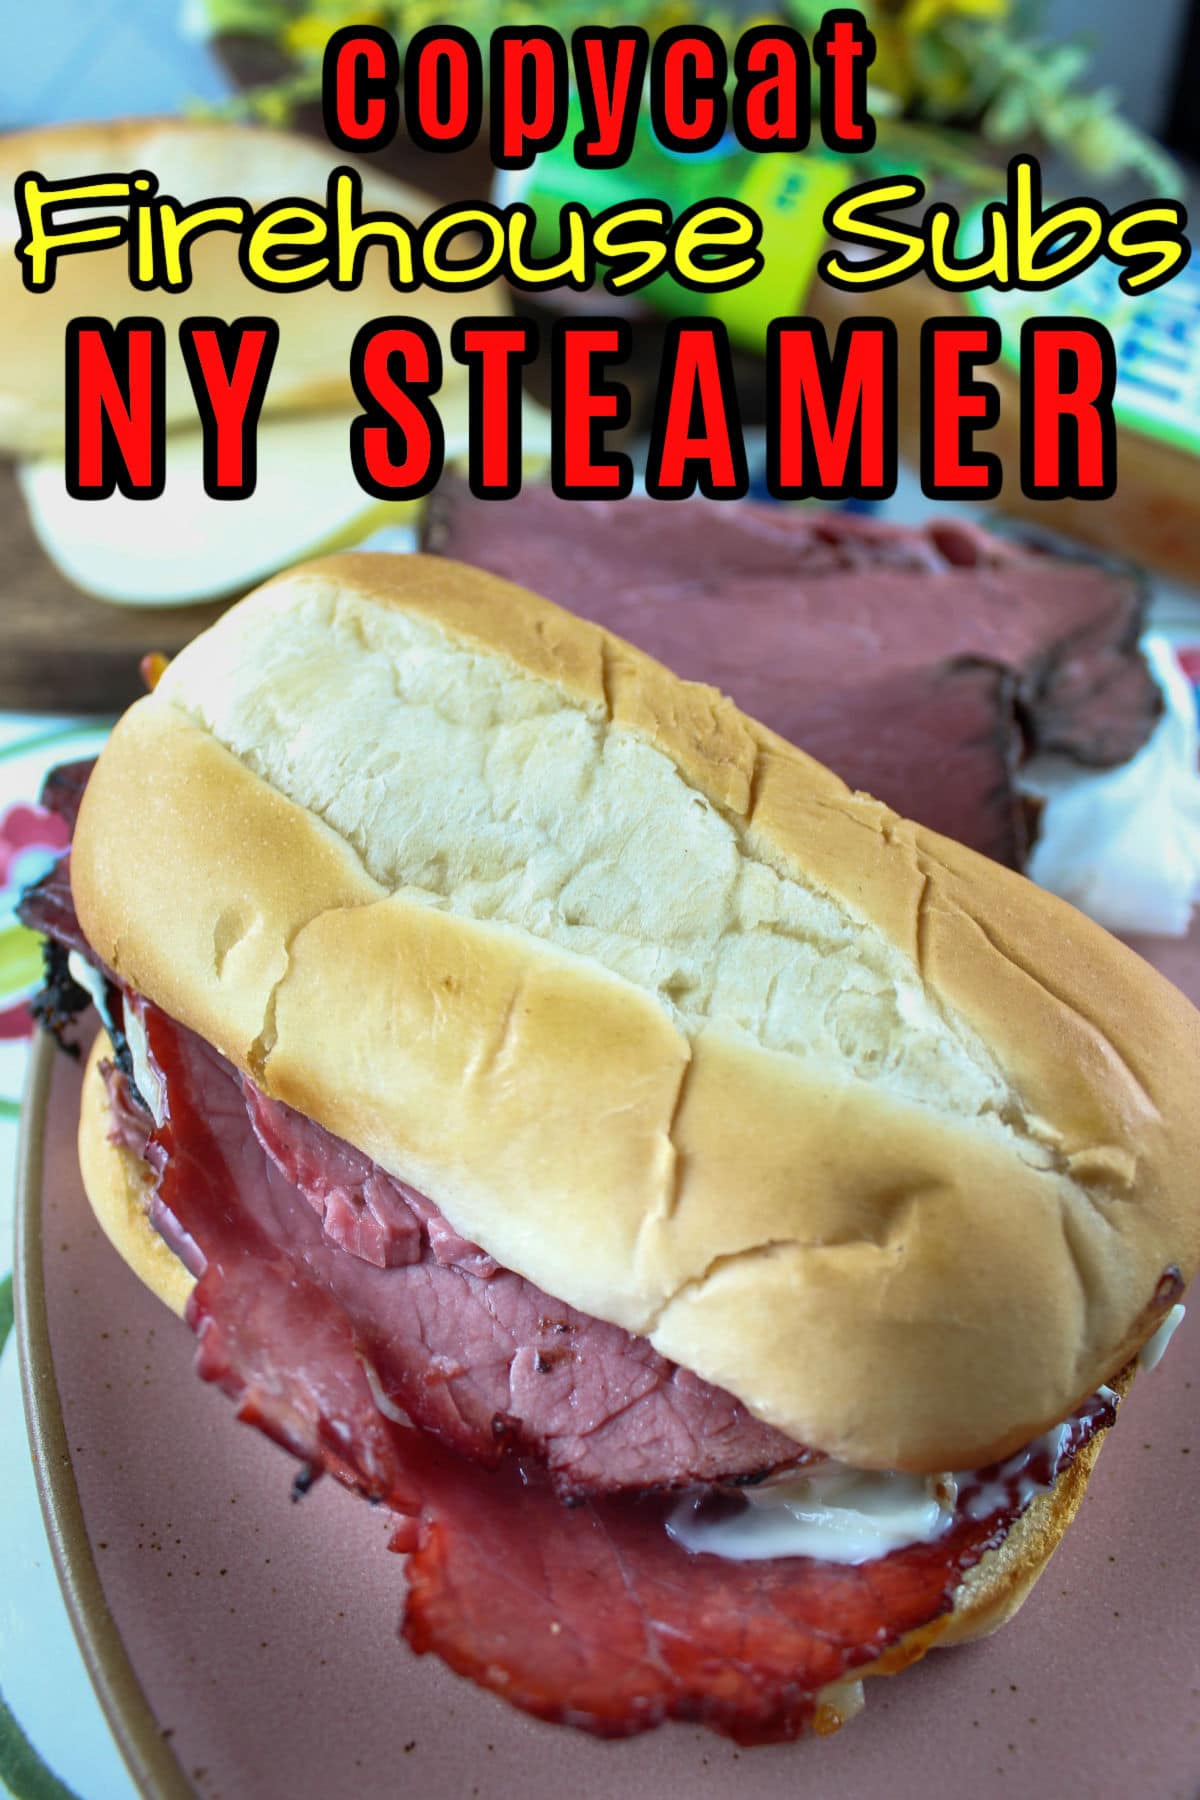 Firehouse Subs New York Steamer is my ab fab favorite sandwich at my AB FAB favorite sub place! Corned beef brisket and pastrami, melted provolone, deli mustard, mayo, and Italian dressing = so delicious!  via @foodhussy